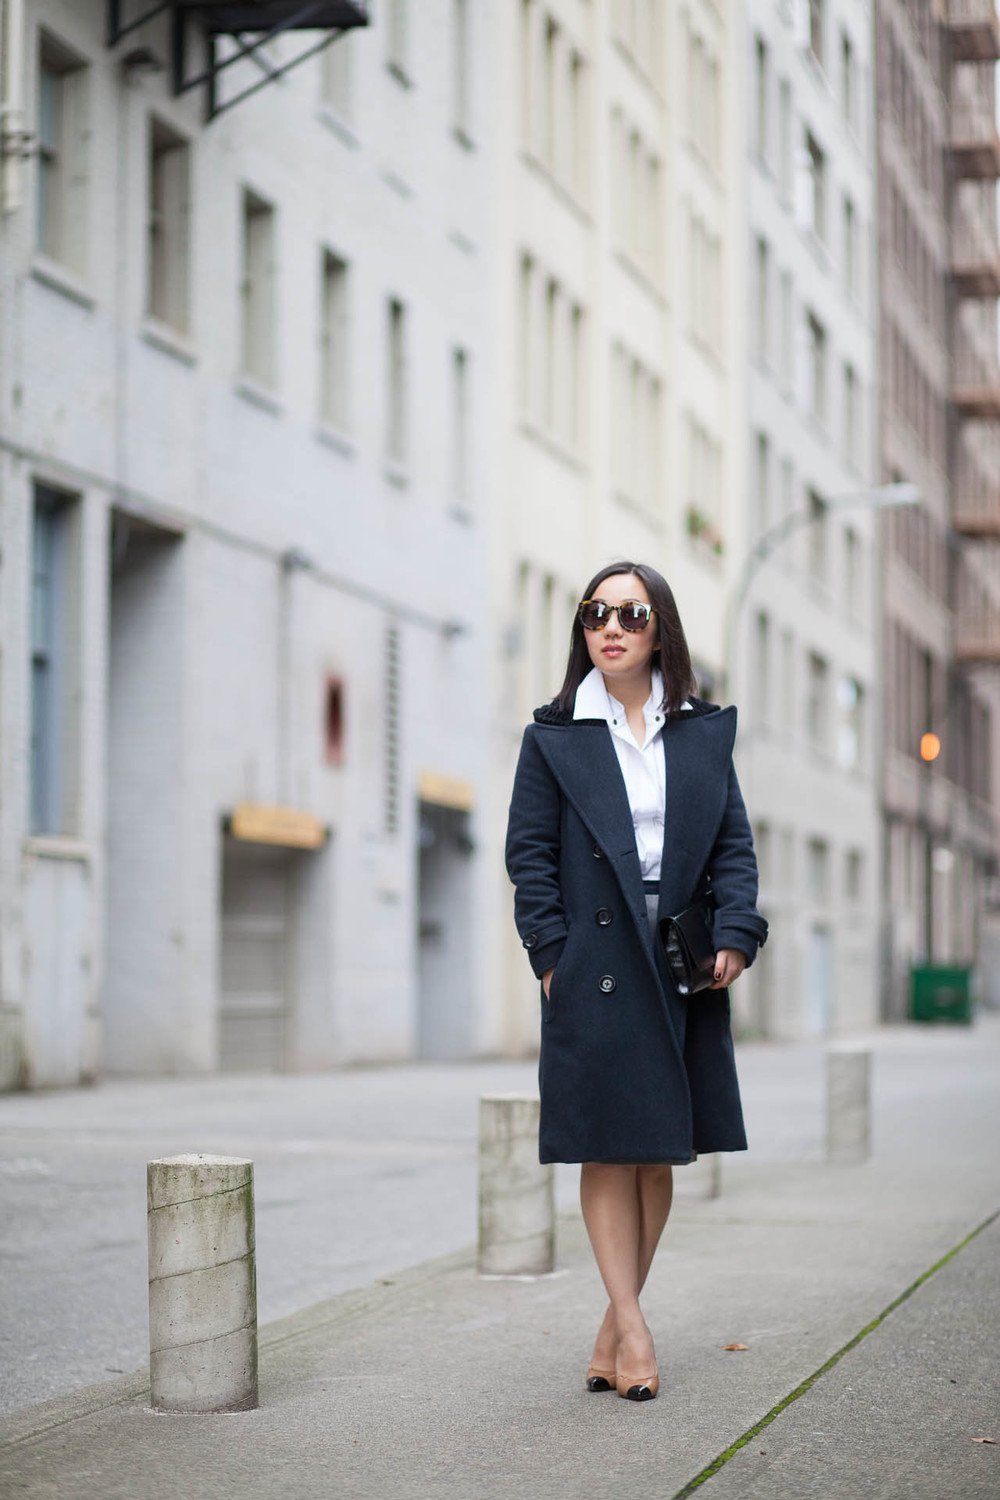 Emerson Fry peacoat and cufflink shirt // Vancouver fashion blogger Stuff I Love